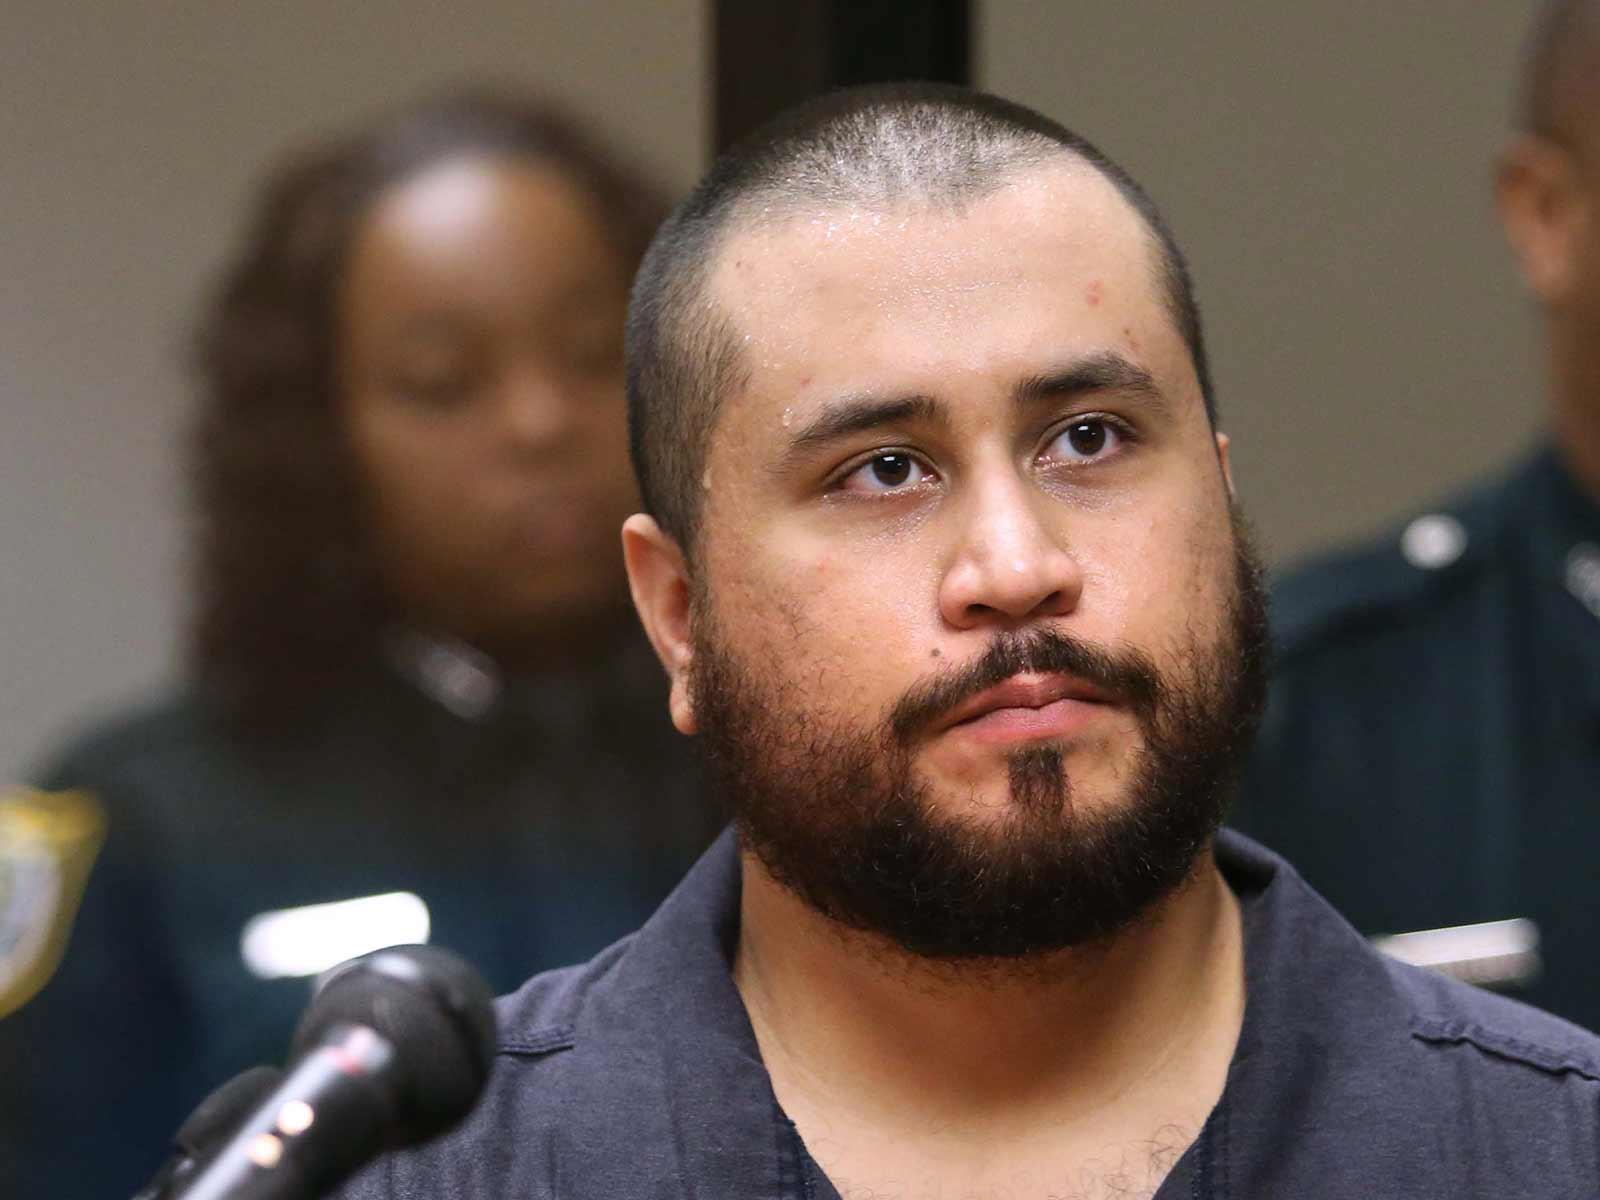 George Zimmerman Says He’s $2.5 Million in Debt, Too Broke to Afford Lawyer